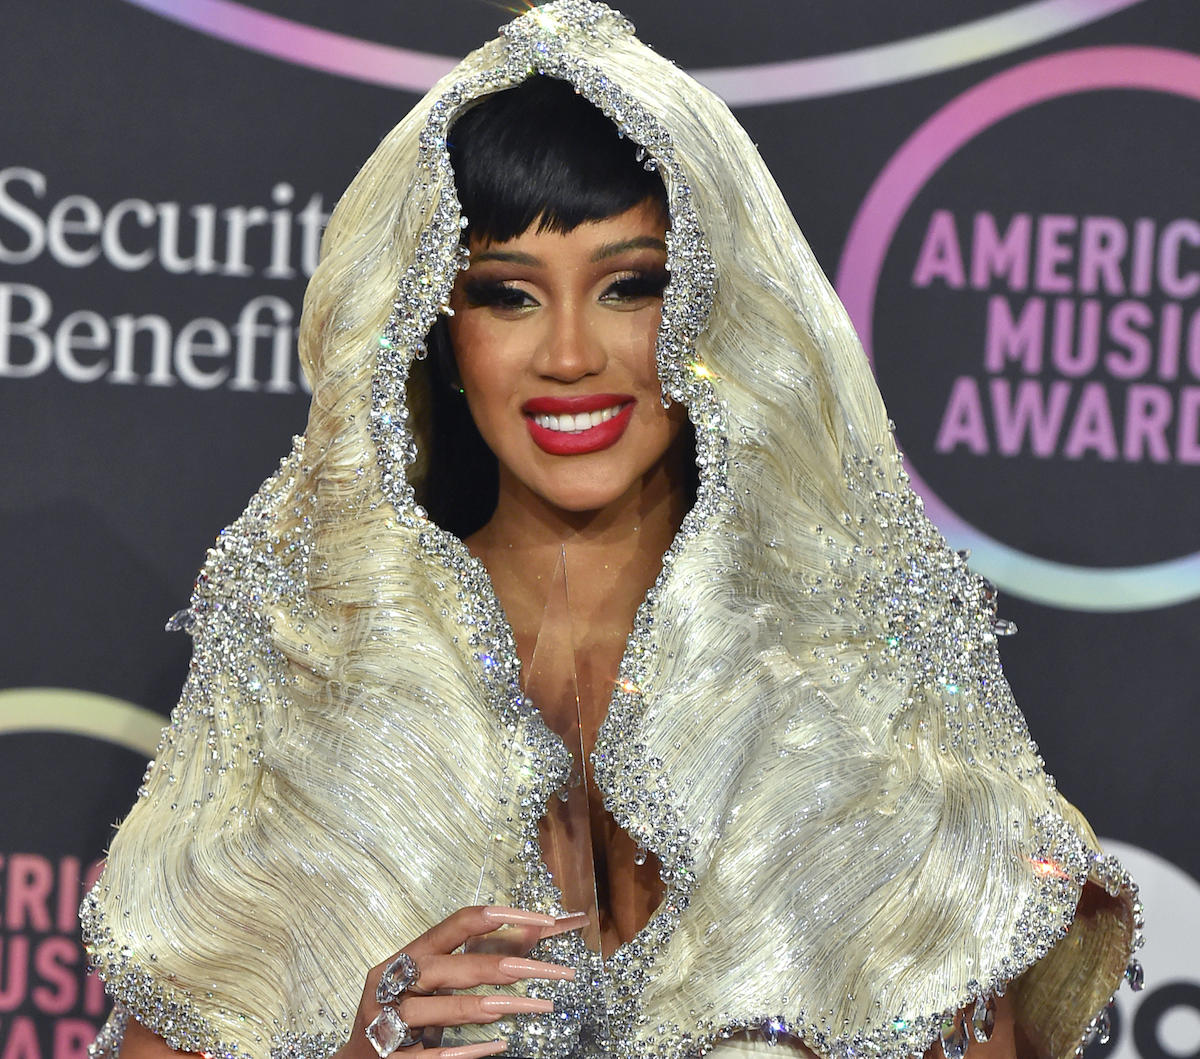 Cardi B in the pressroom at the 2021 American Music Awards held at the Microsoft Theatre on November 21, 2021 in Los Angeles, CA. © OConnor / AFF-USA.com